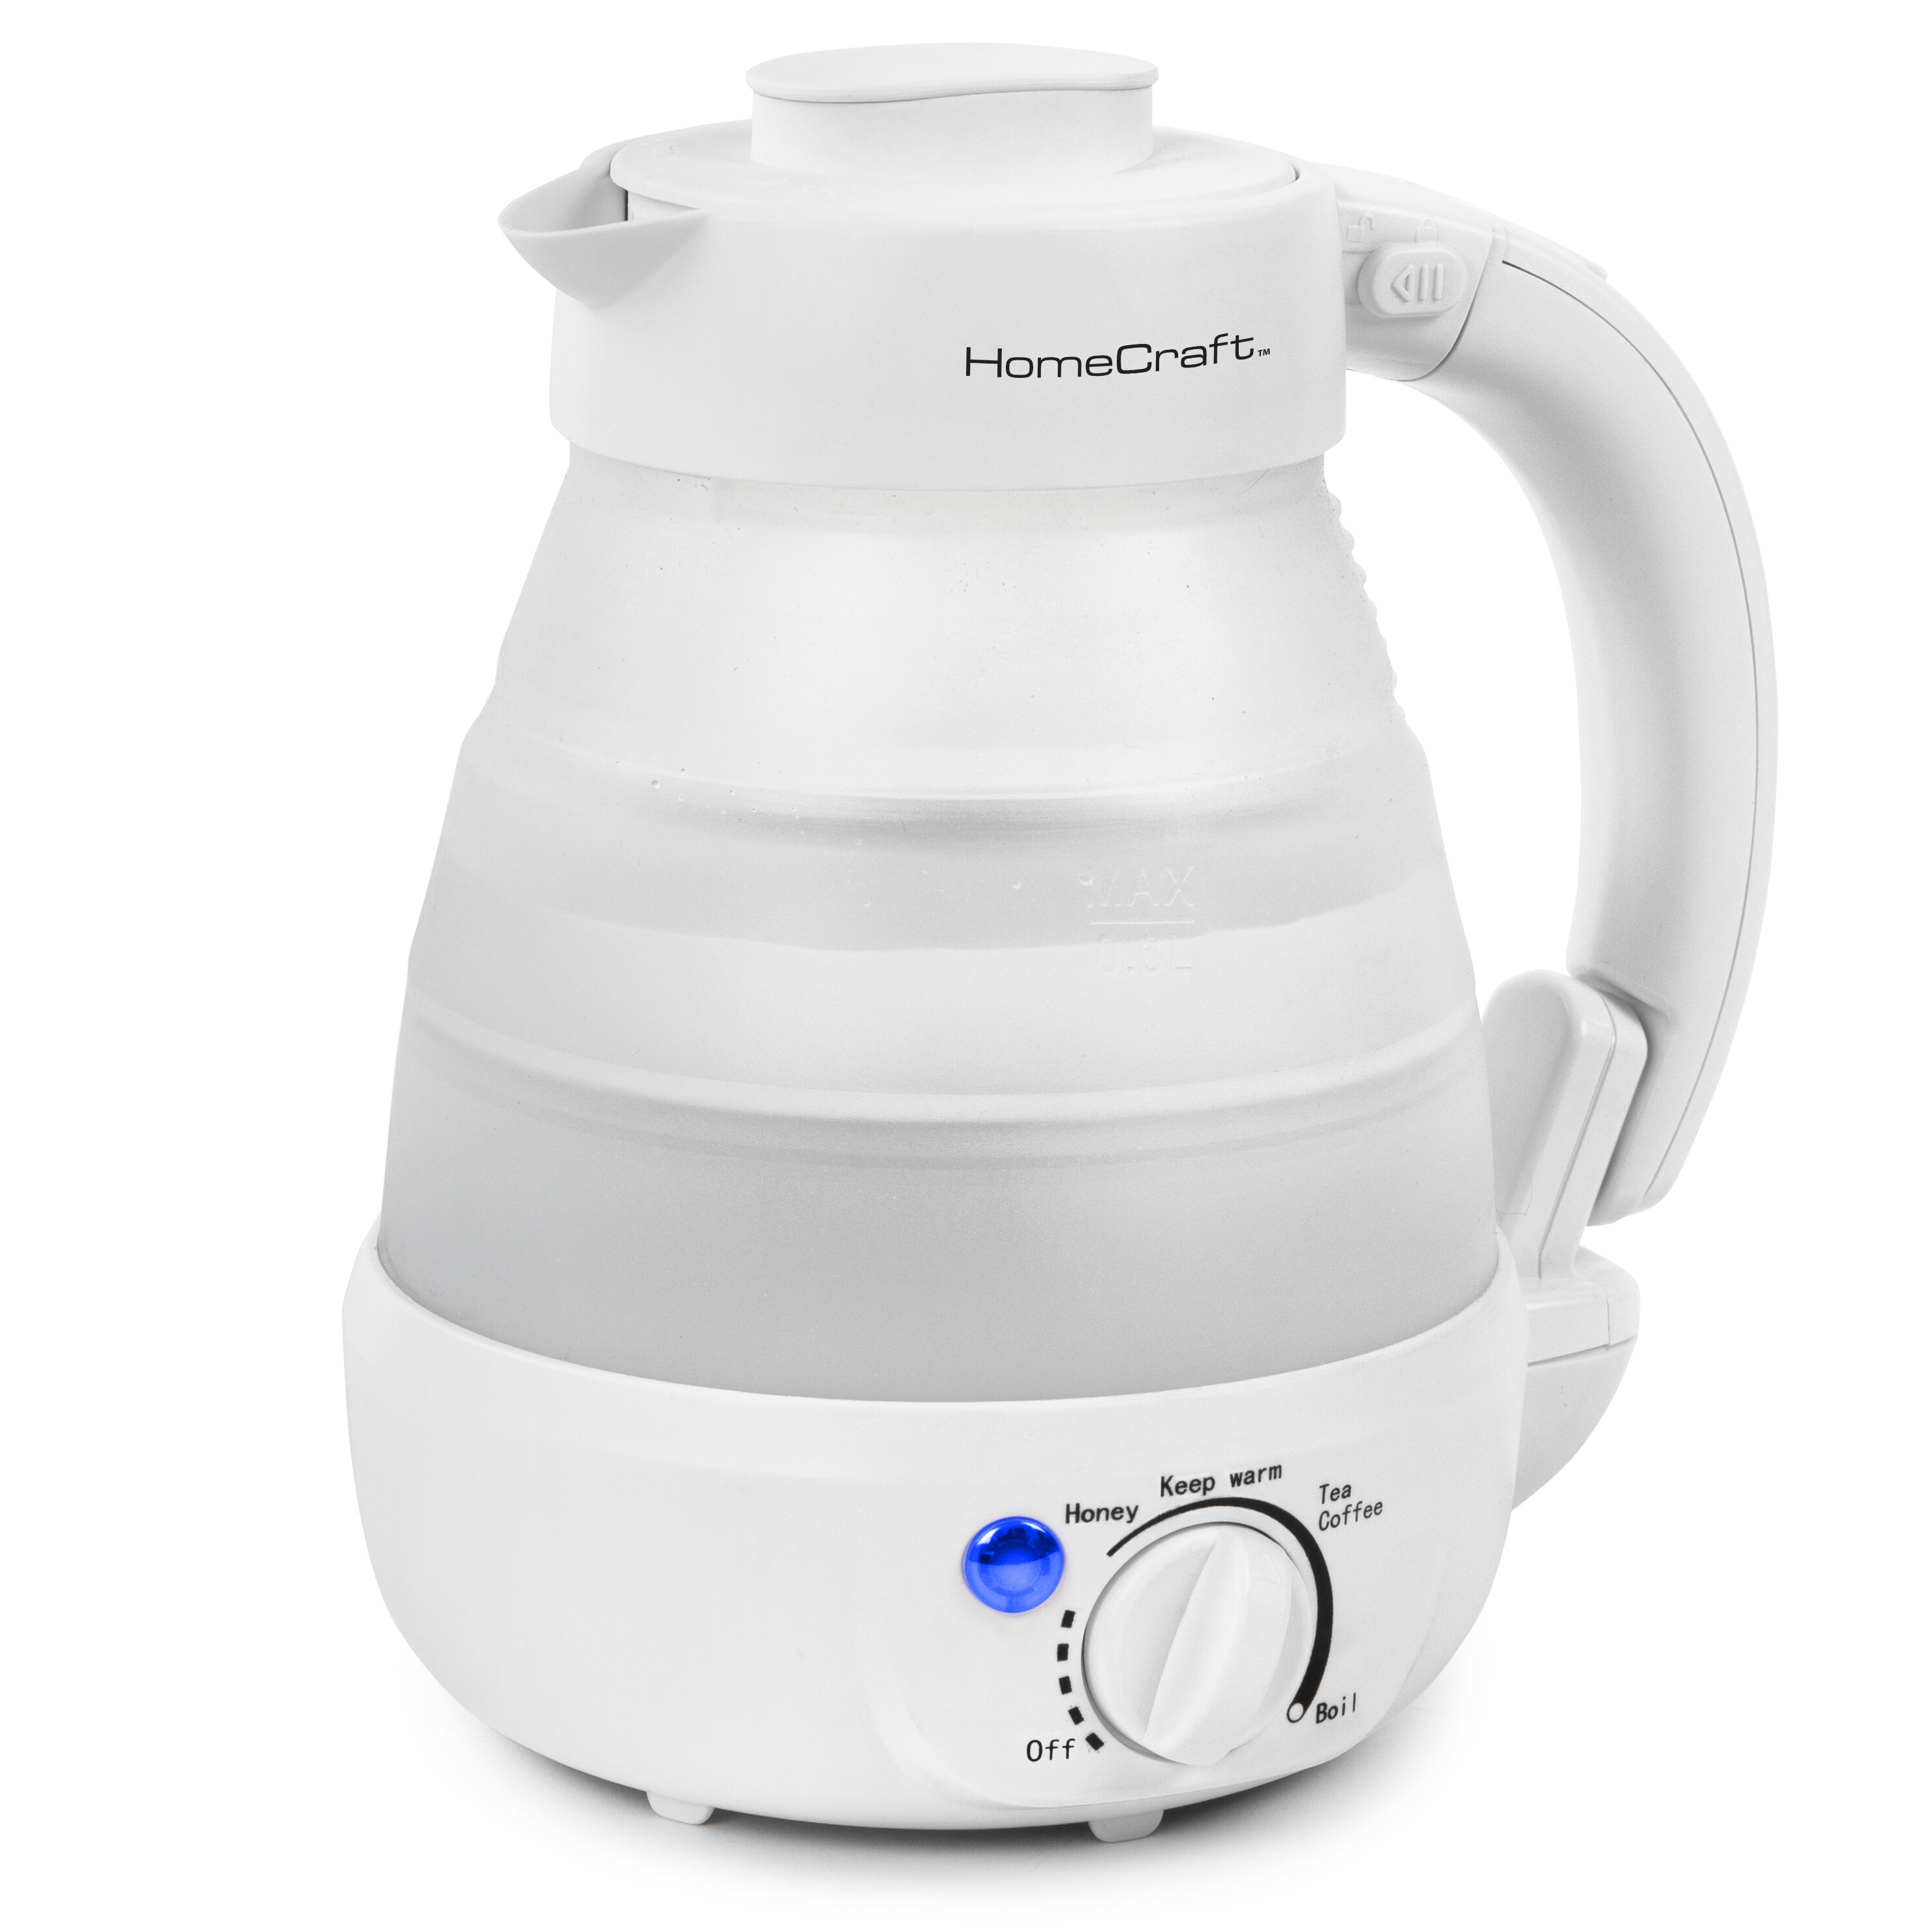 HomeCraft 3-Quart Ice Iced Coffee and Tea Brewing System